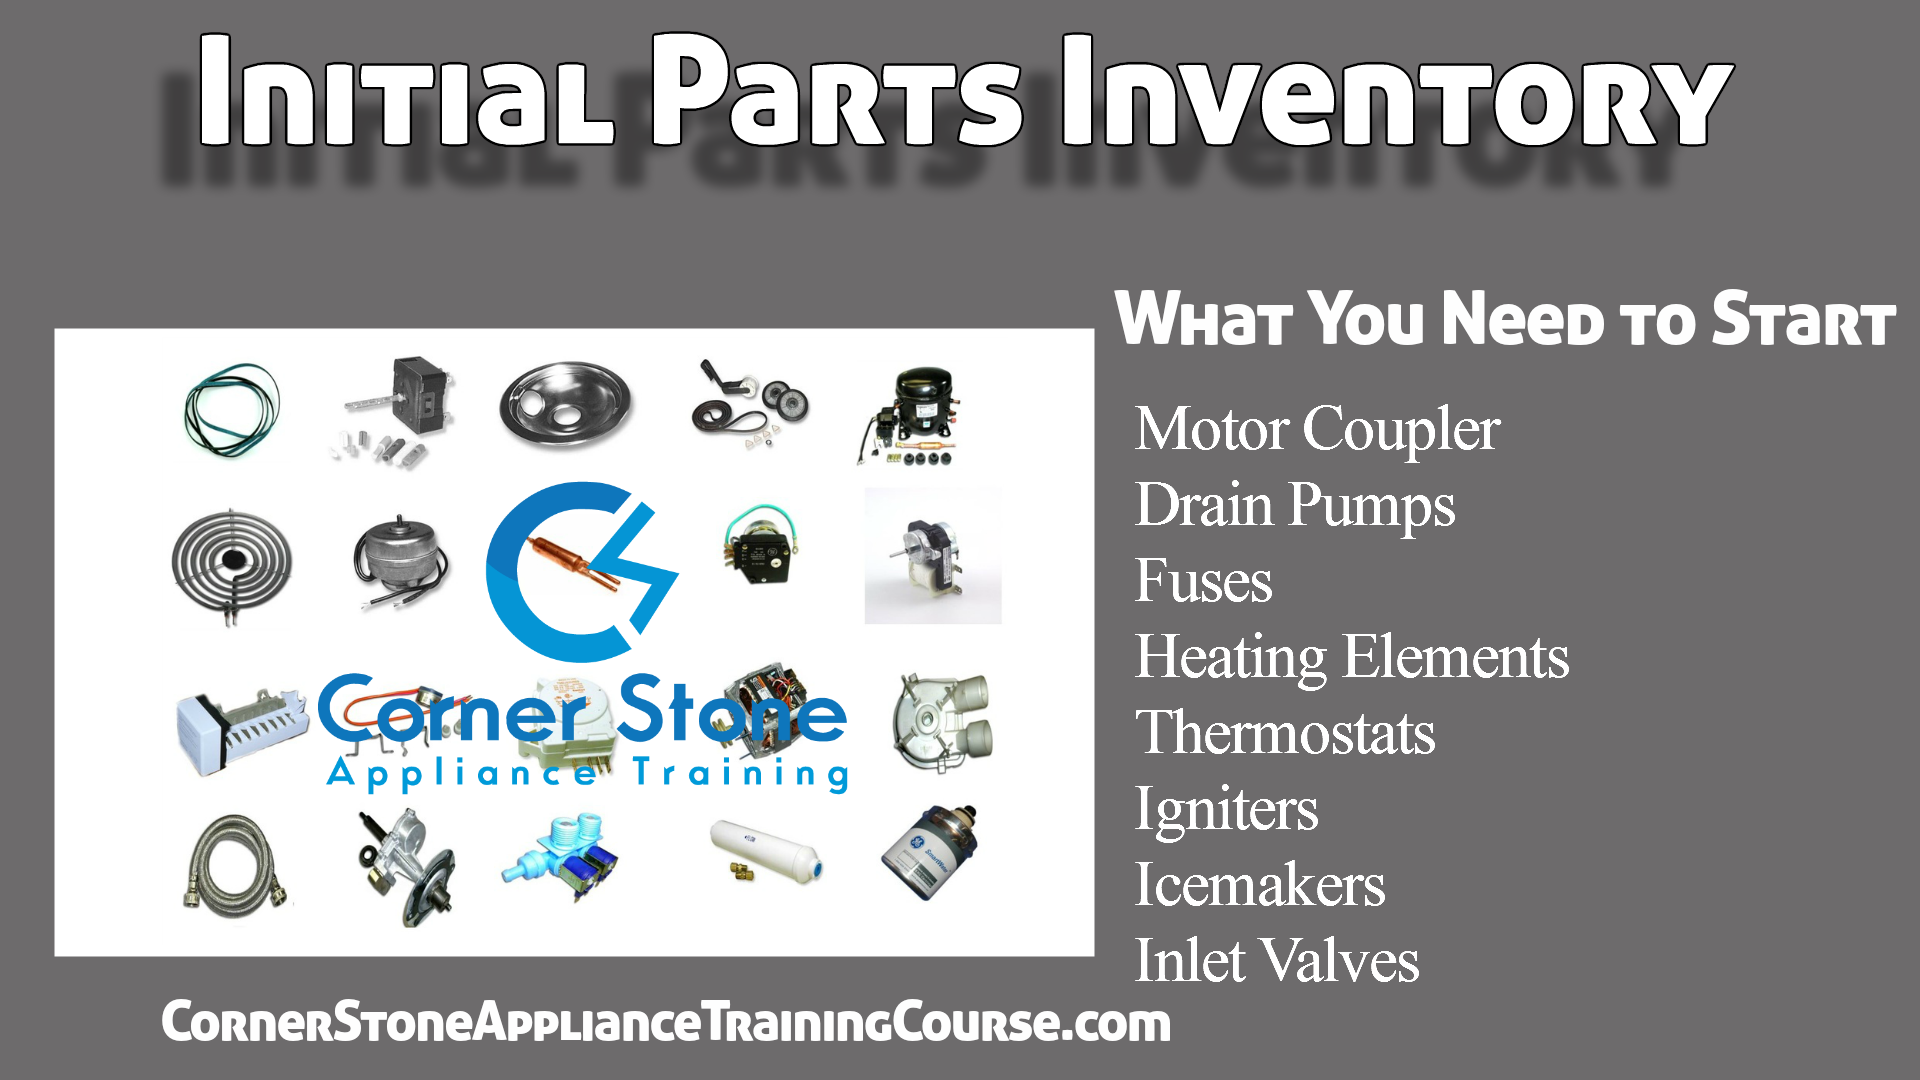 Appliances - Parts Needed for Business